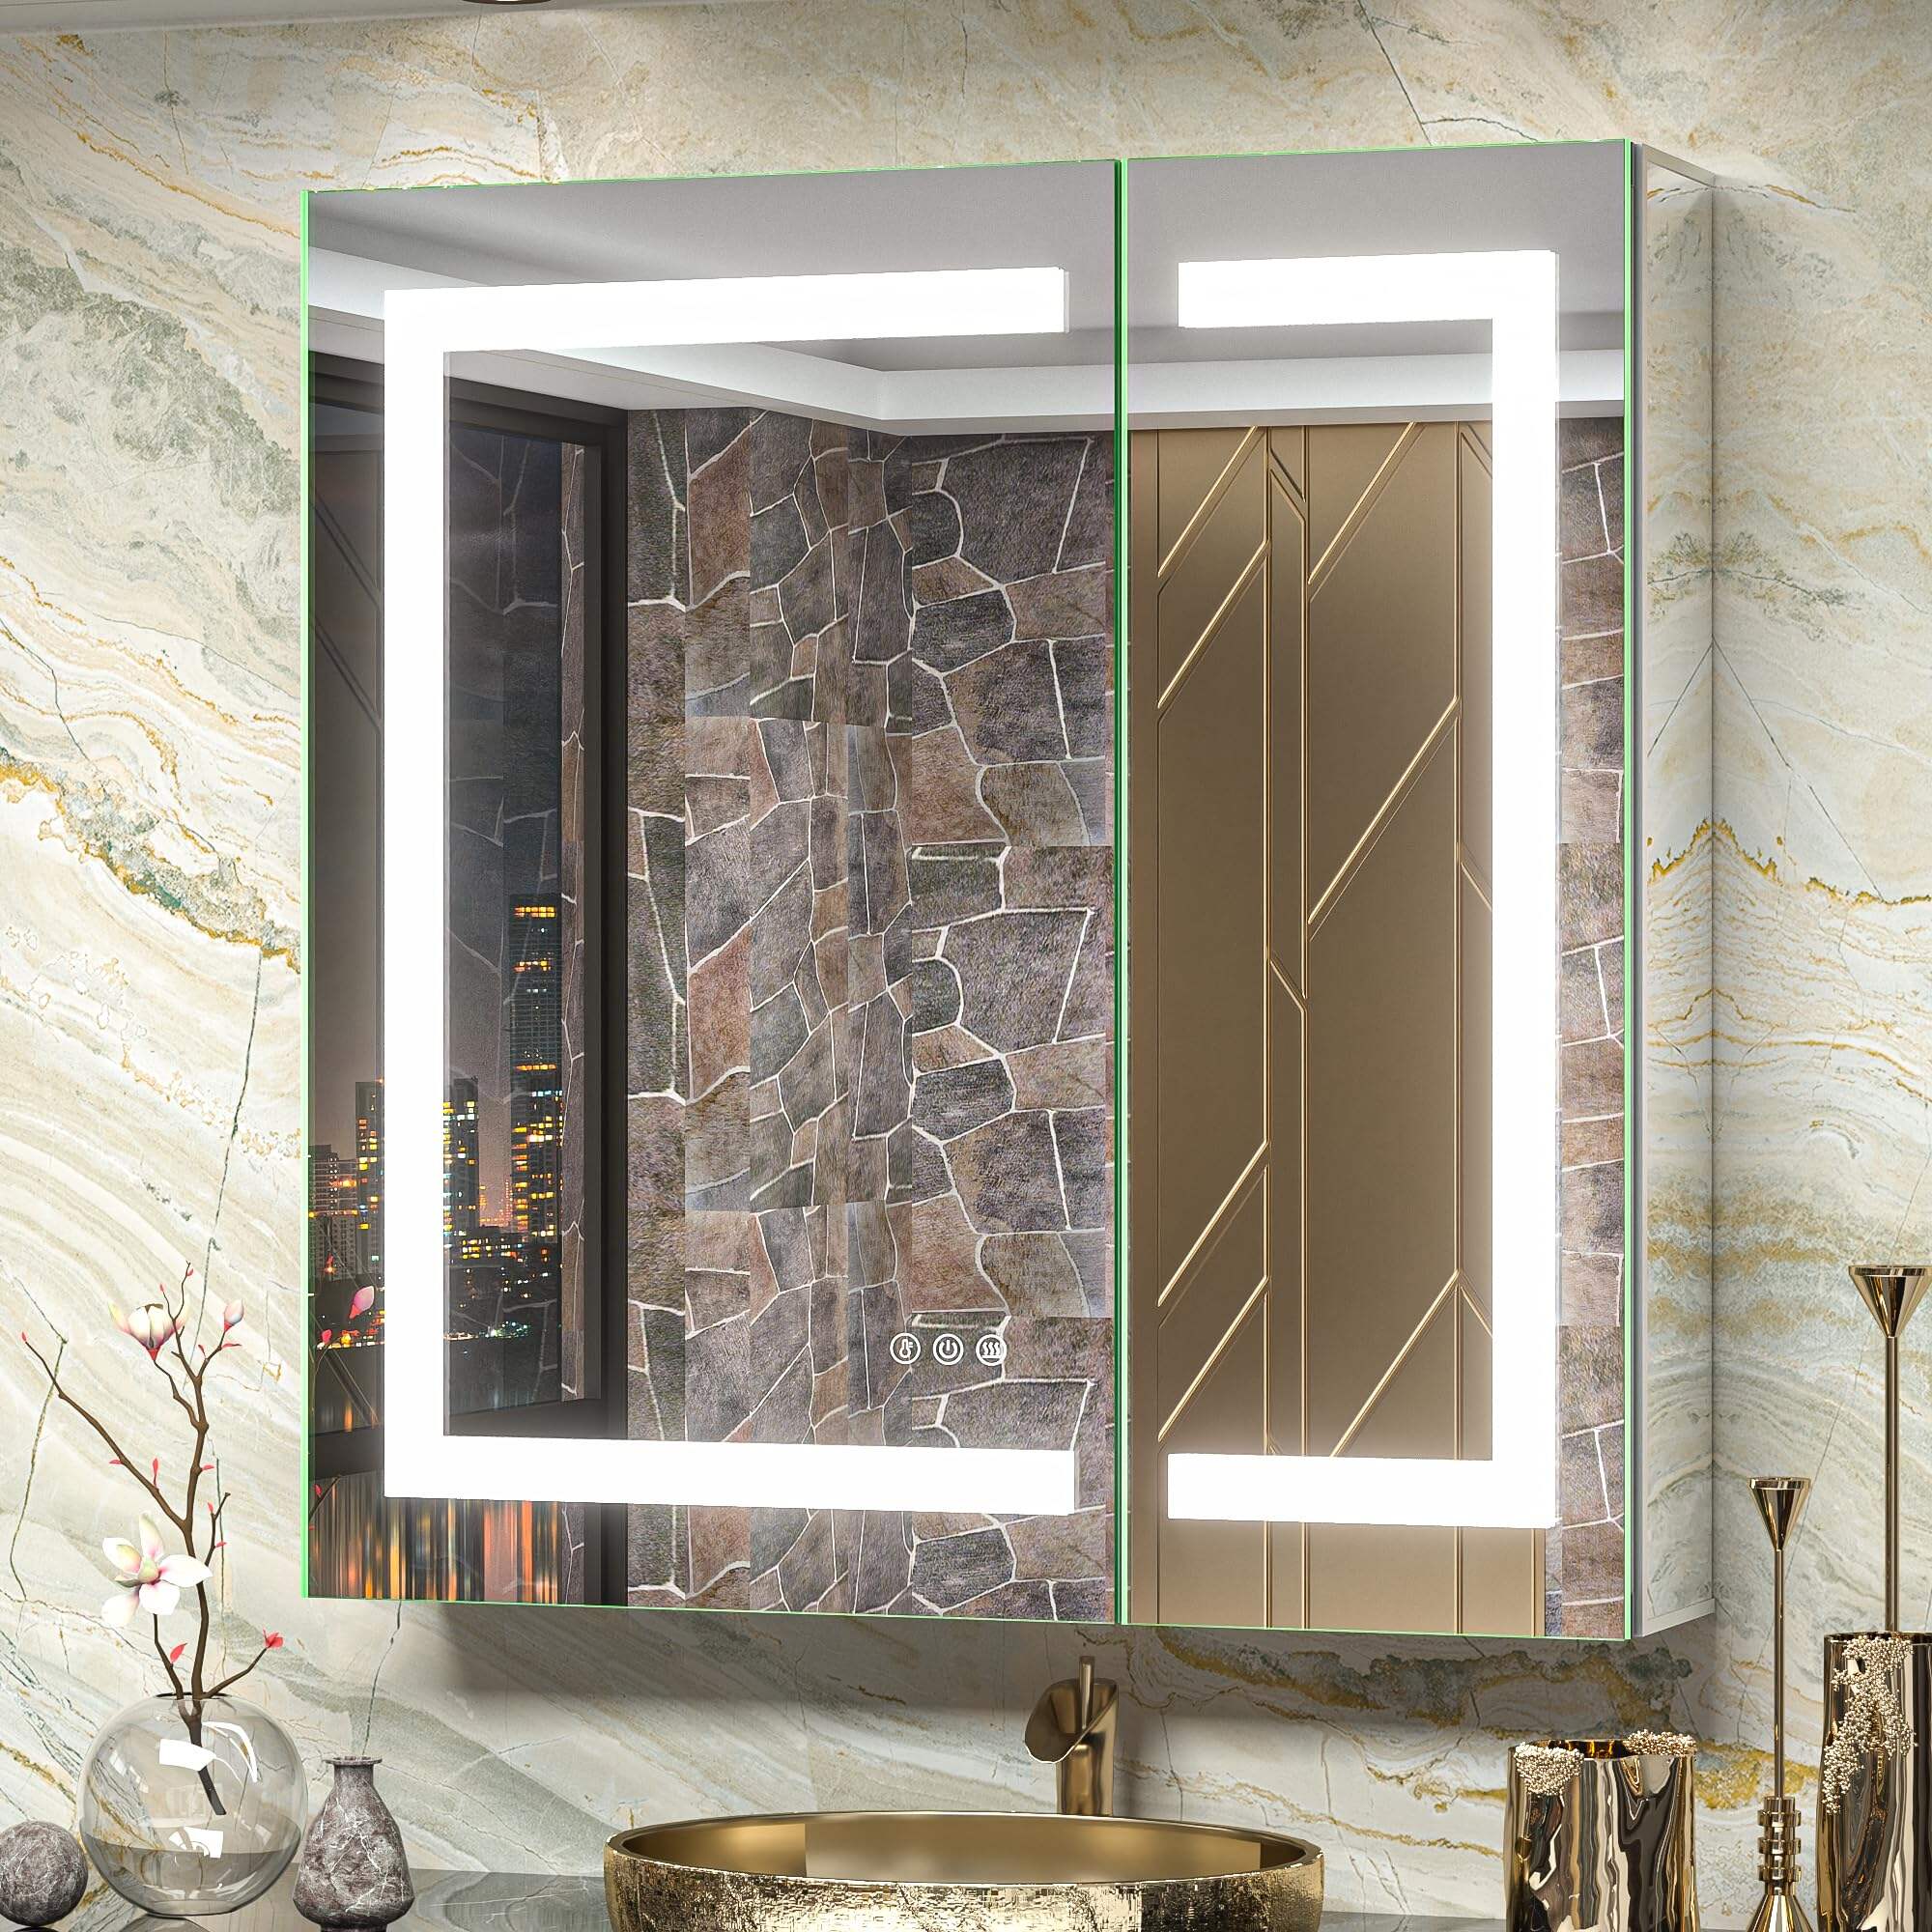 Foshan Haohan Smart Home Co., Ltd. 30x32 Mirrored Medicine Cabinets for Bathroom with Electrical Outlet, Frontlit Anti-Fog 3 Colors Temperature Dimmable Surface or Recessed Mount for Vanity and Modern Decor